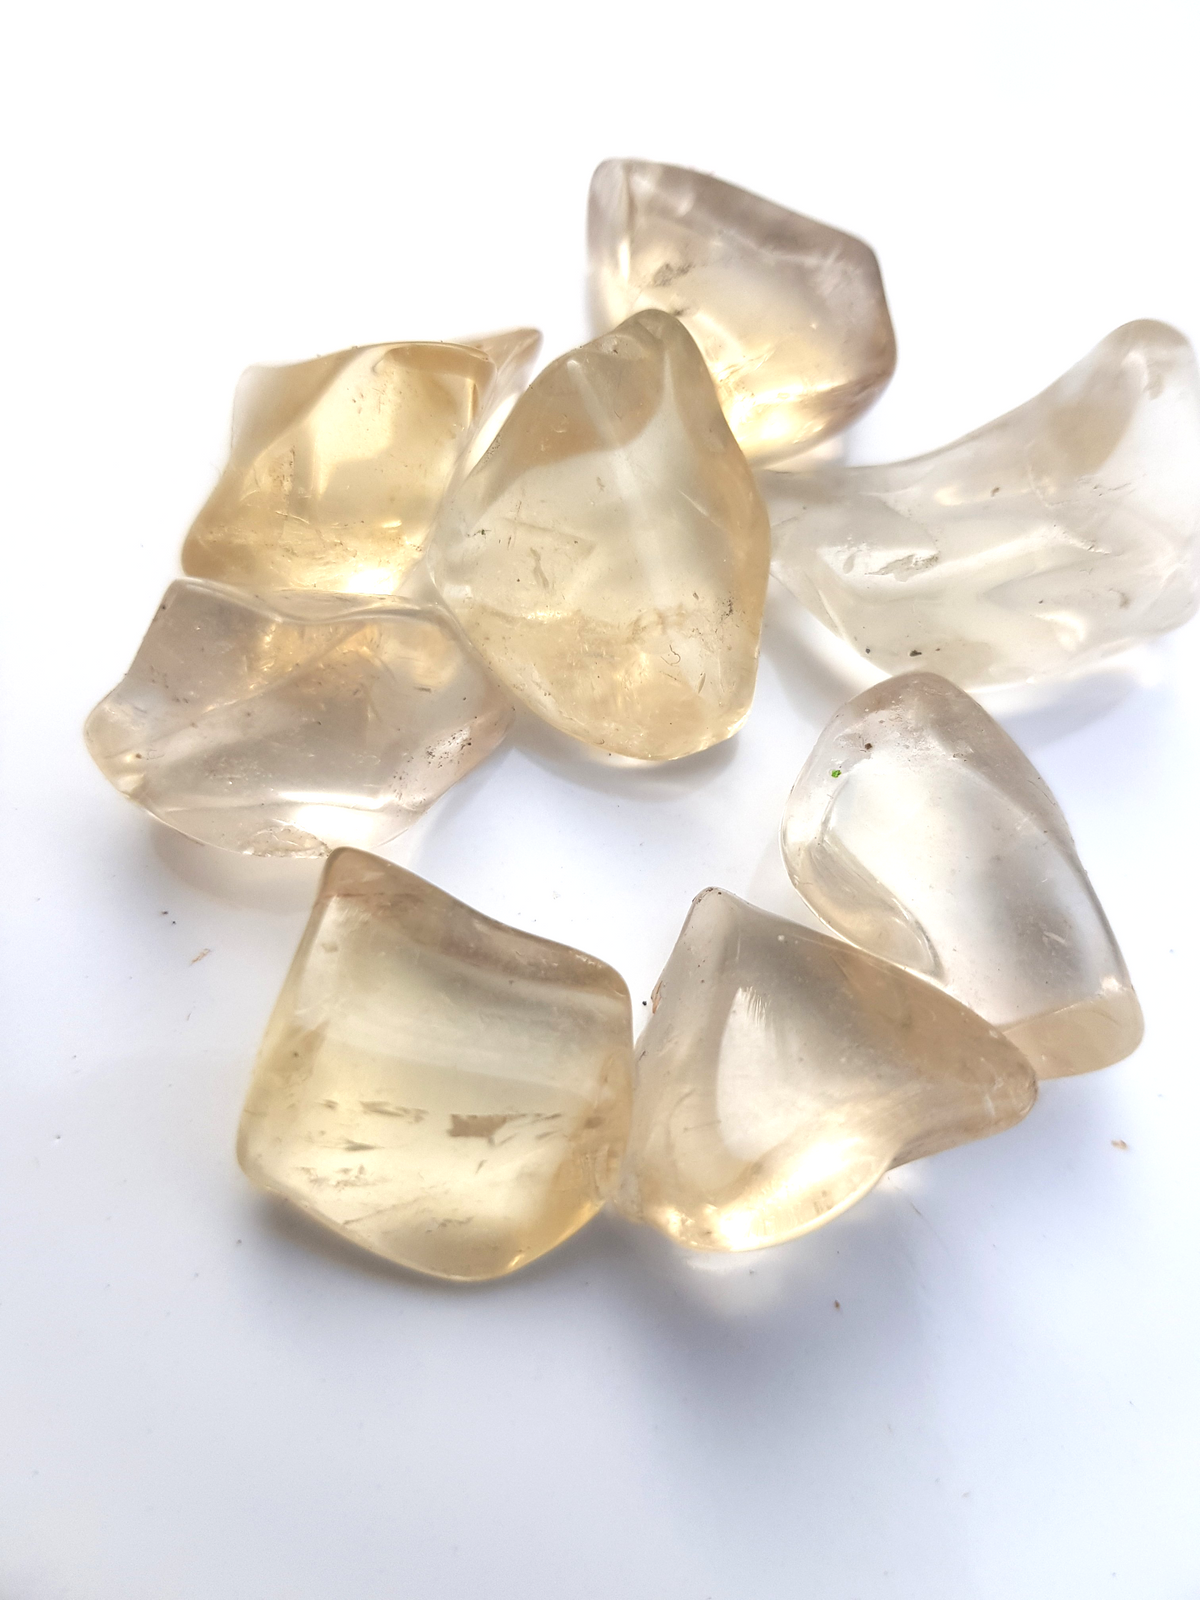 irregularly shaped small pieces of citrine. It is very translucent and a light lemon colour